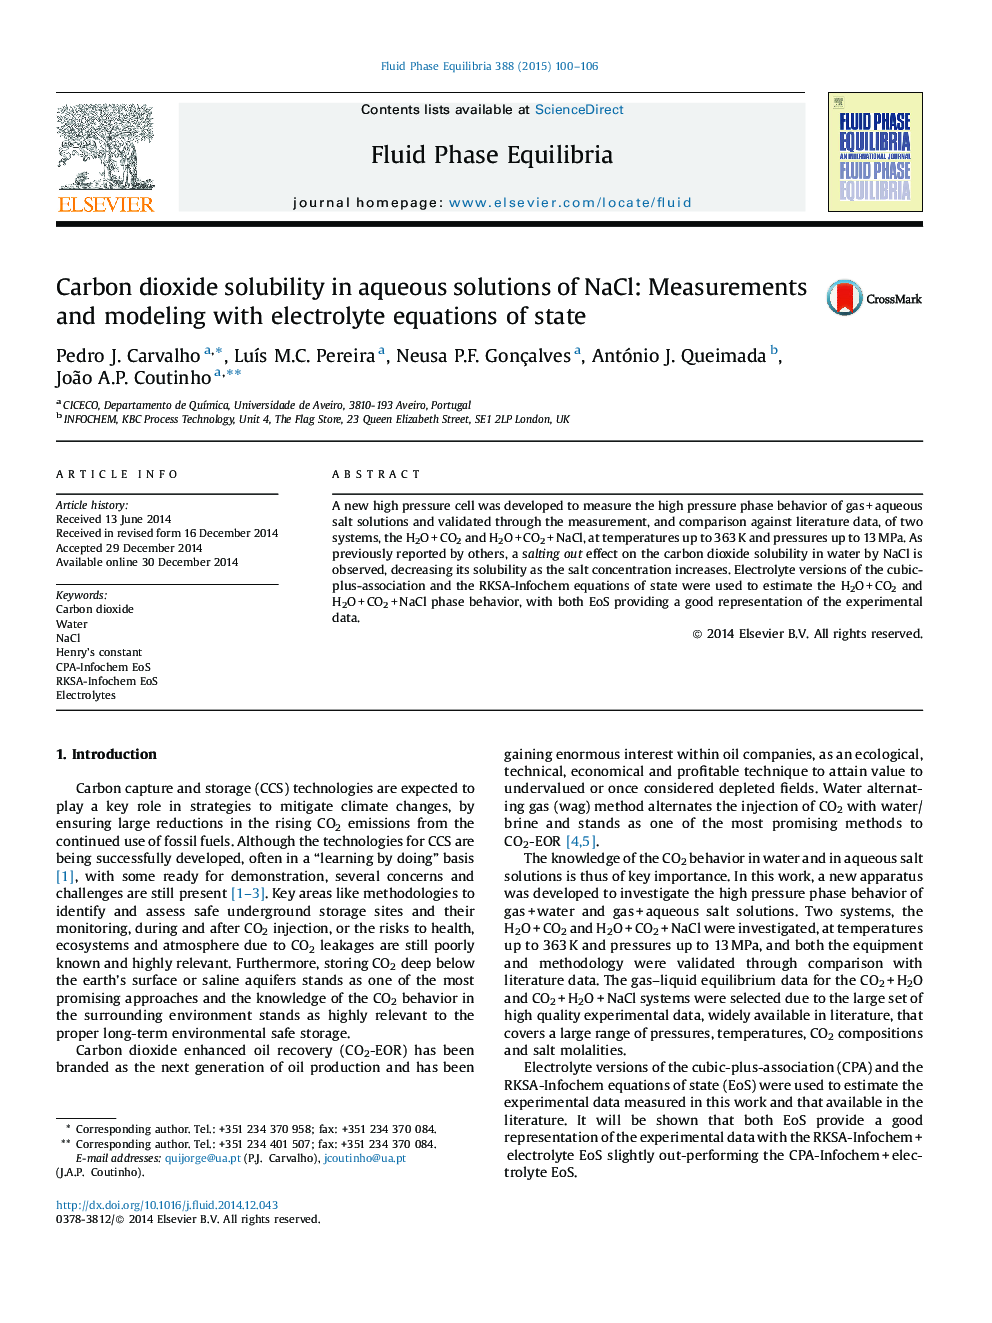 Carbon dioxide solubility in aqueous solutions of NaCl: Measurements and modeling with electrolyte equations of state